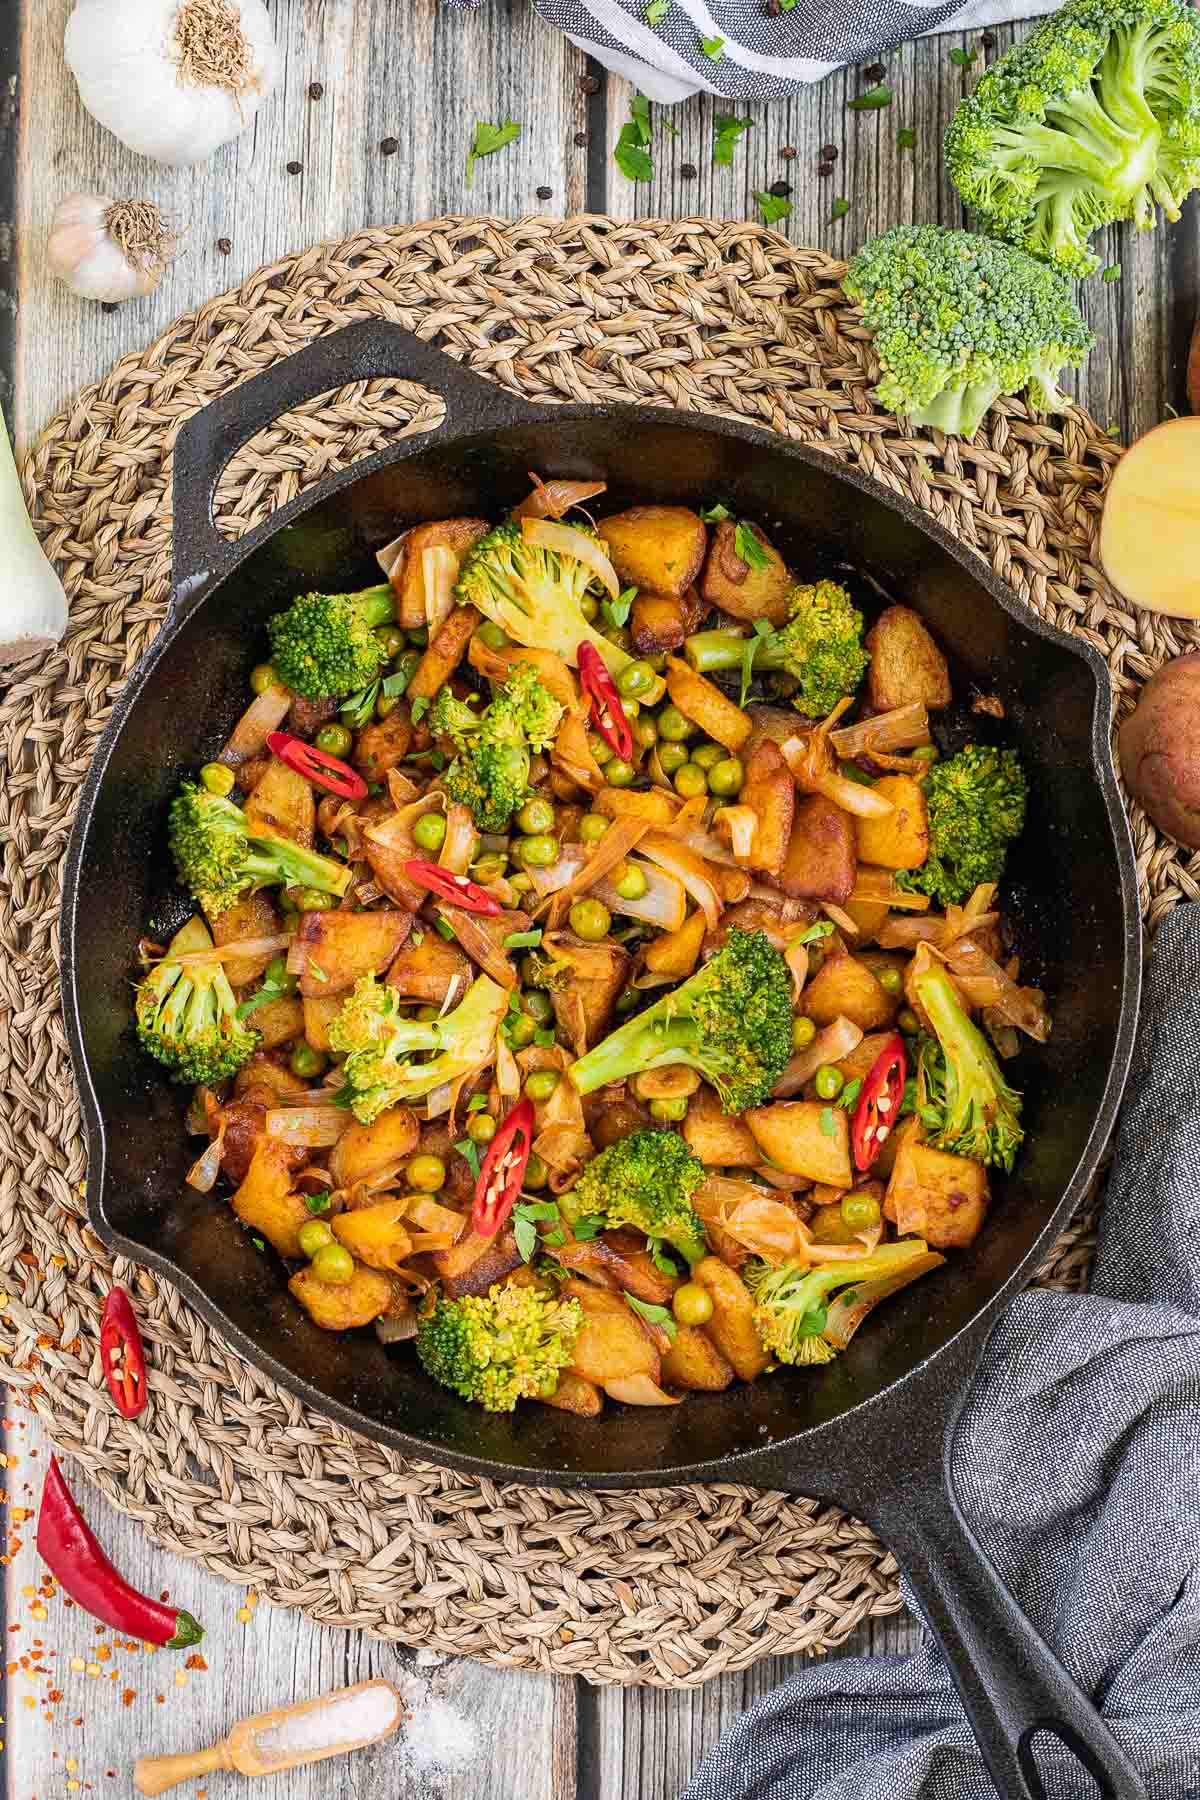 Skillet with potatoes, broccoli, chili peppers, green peas and onion. All slightly fried around the edges.